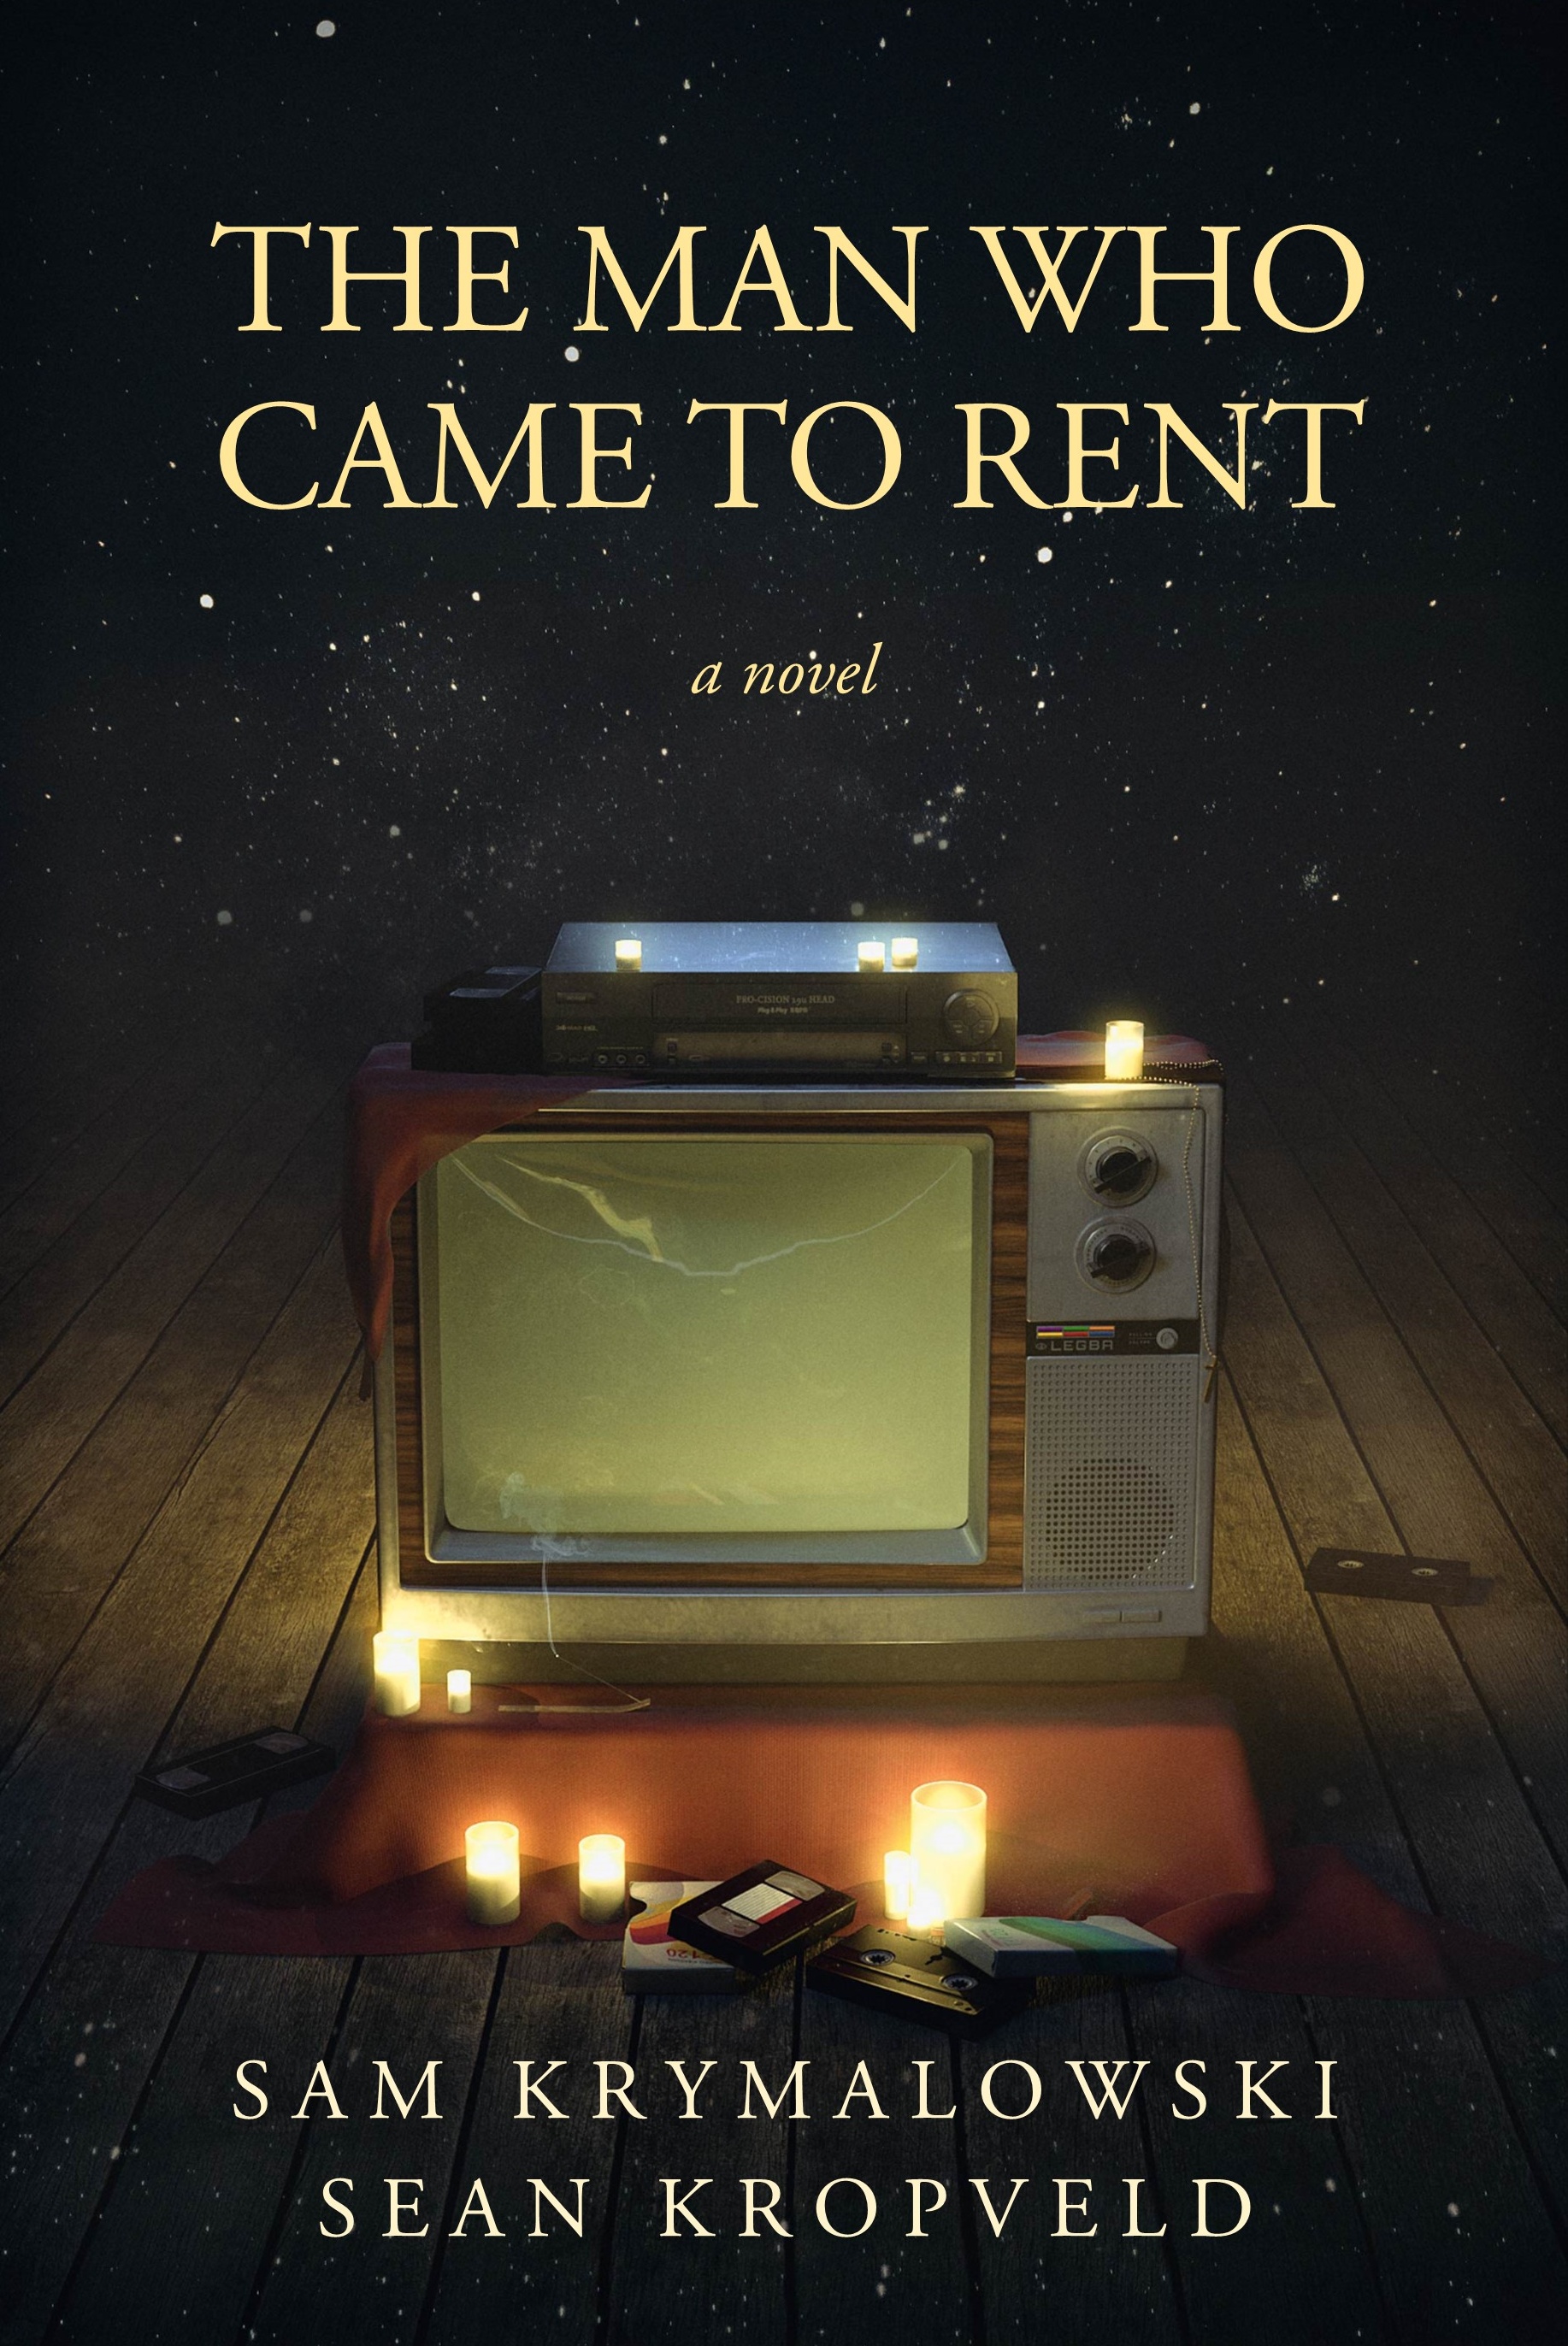 BOOK LAUNCH: The Man Who Came to Rent